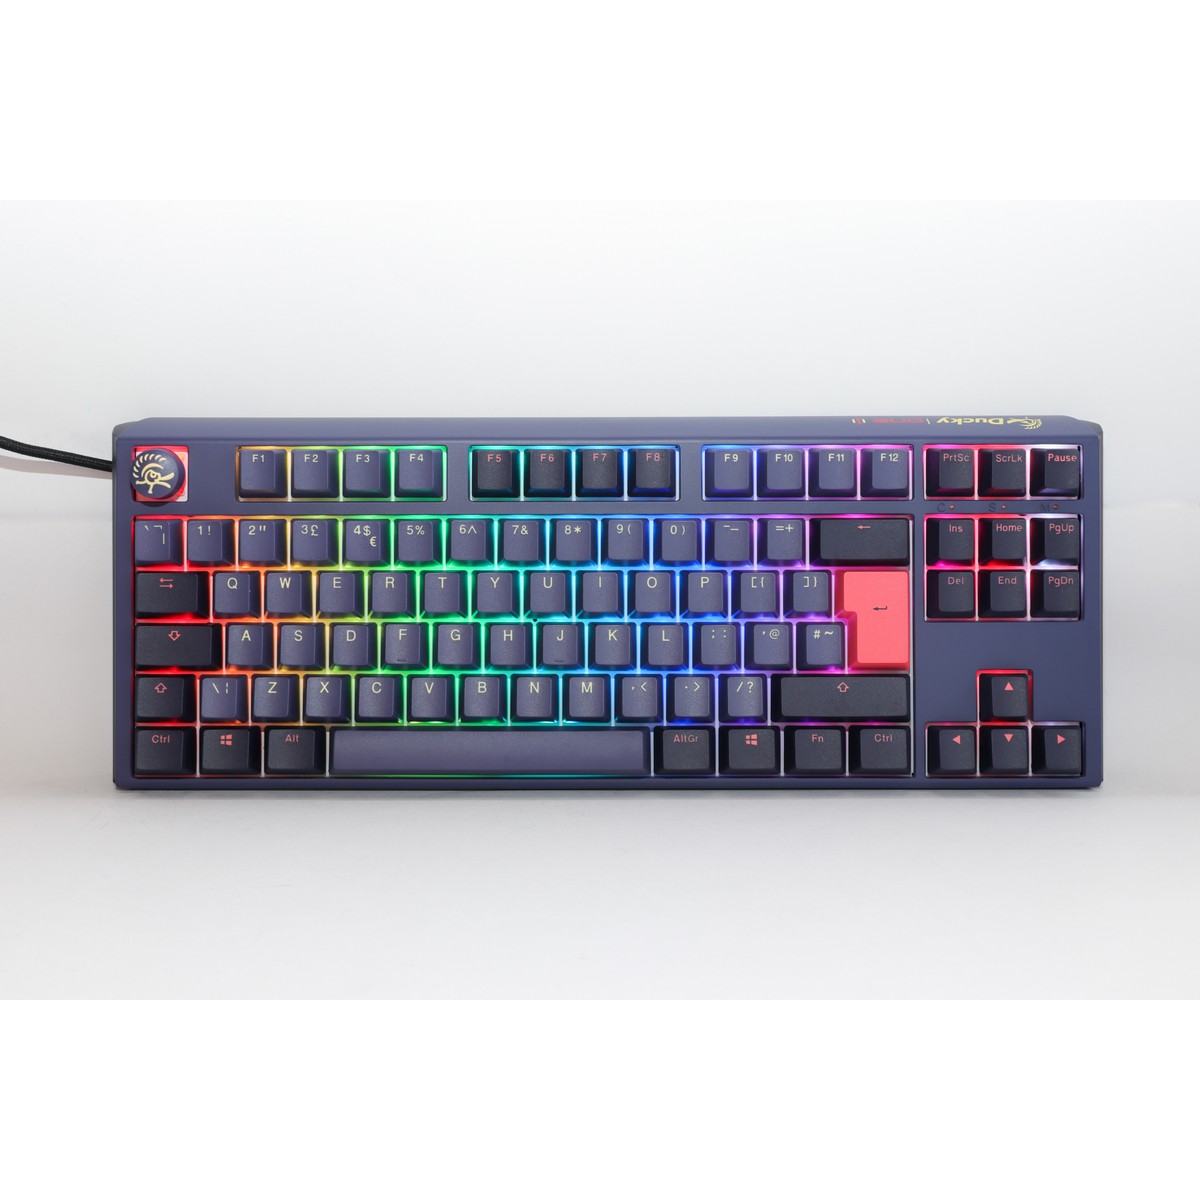 Ducky One 3 Cosmic TKL 80% USB RGB Mechanical Gaming Keyboard Cherry MX Silent Red Switch - UK Layout